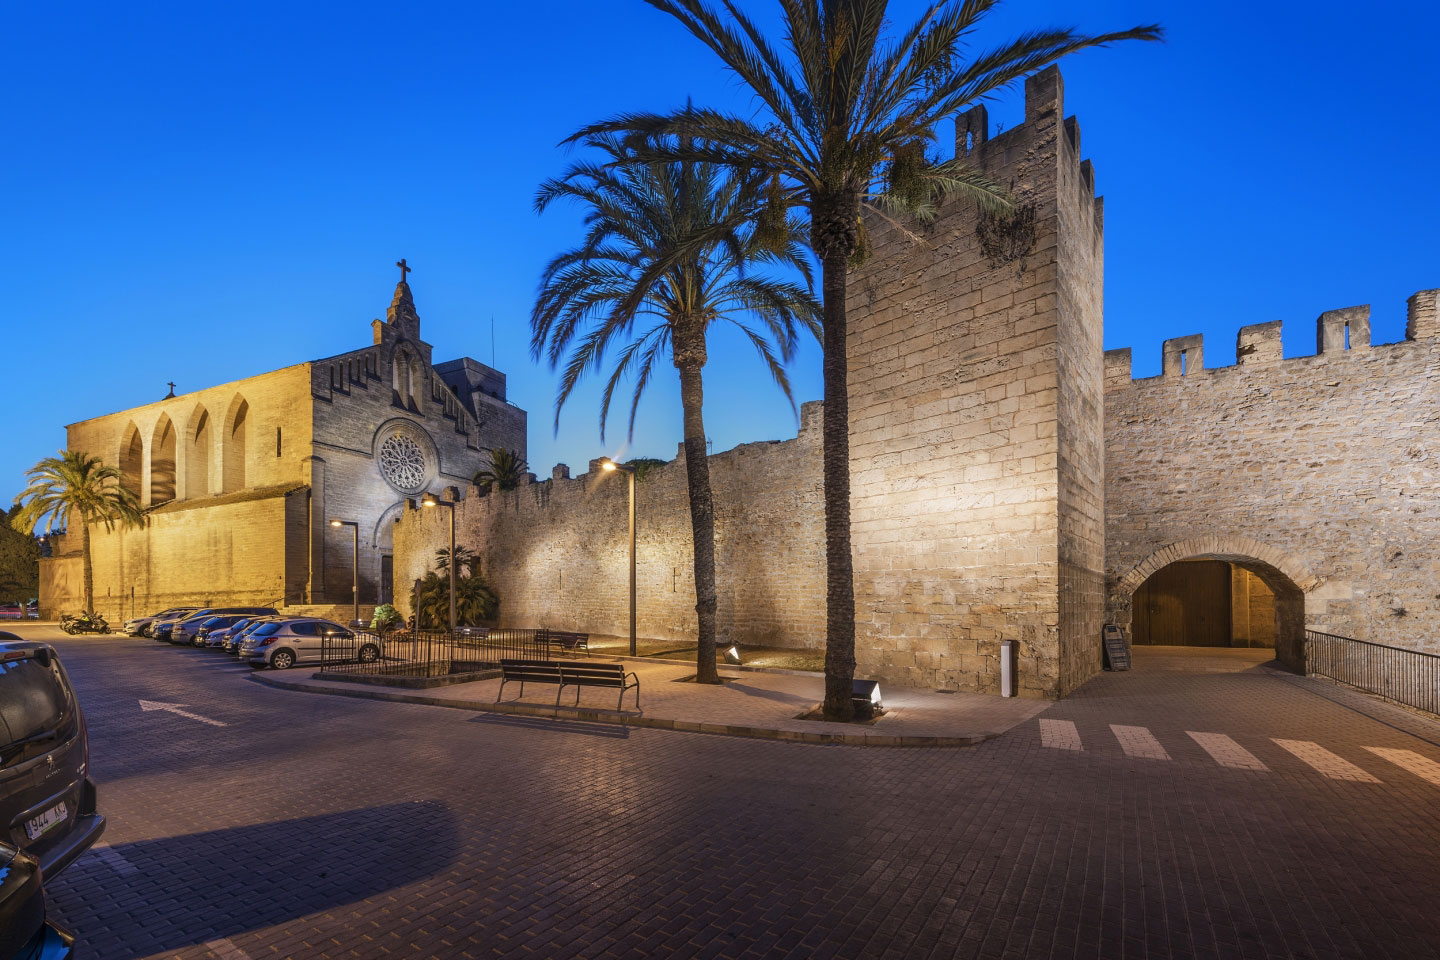 Must-see tourist attractions in Alcudia